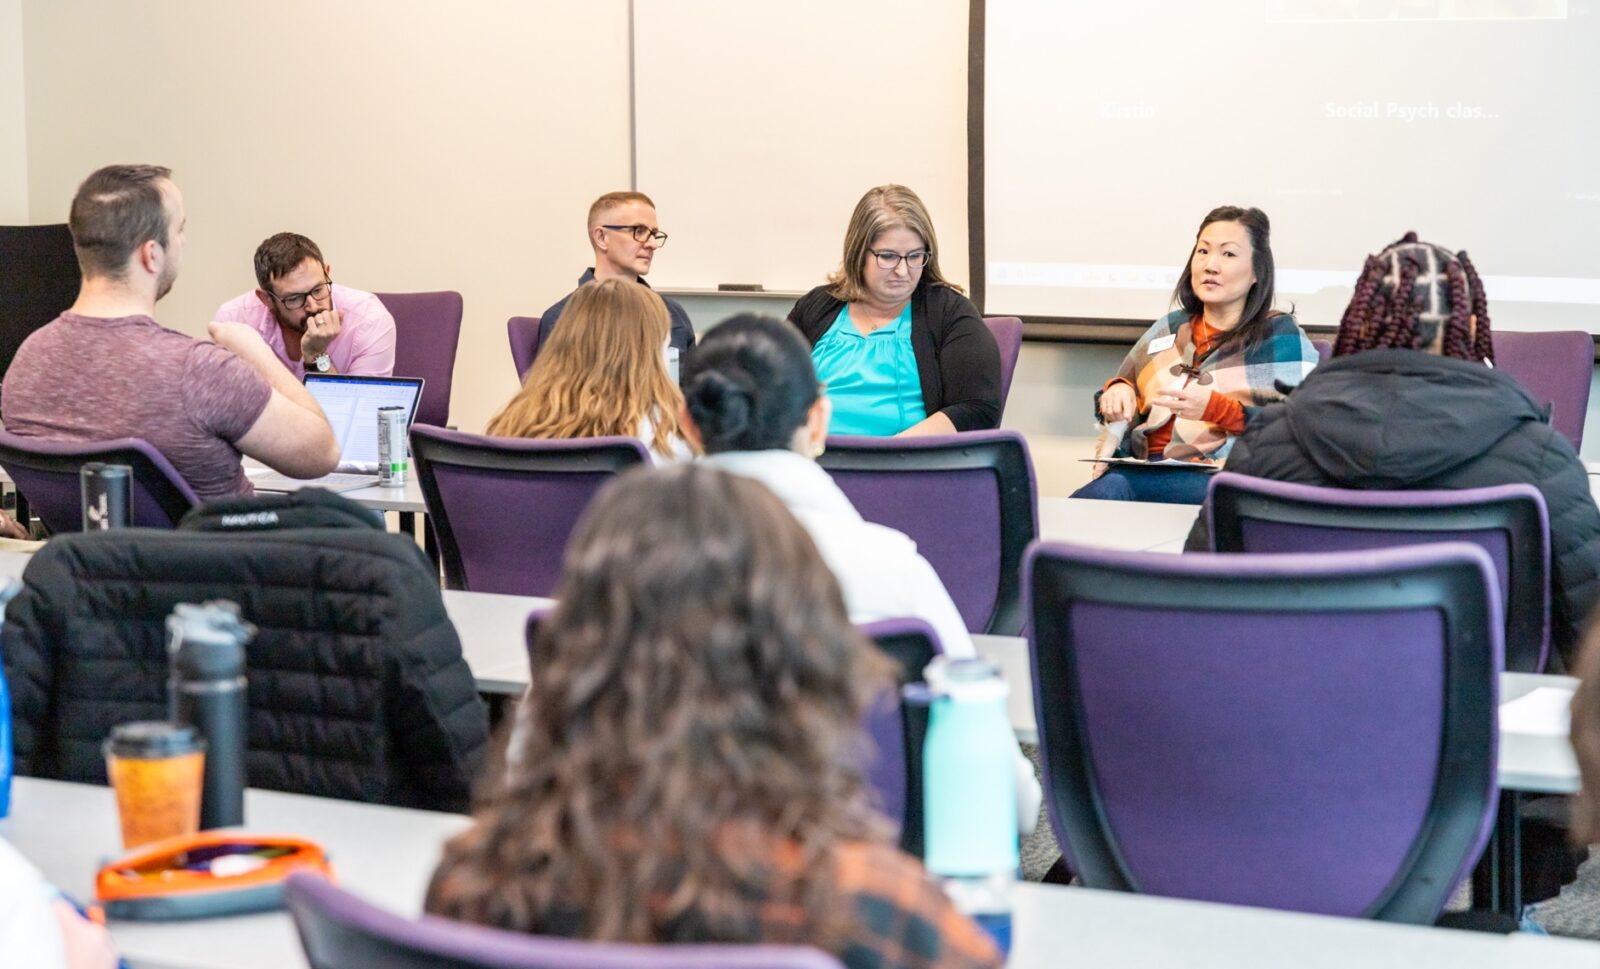 Alumni panel members described their education and career paths to students in HUM 296 Special Projects course